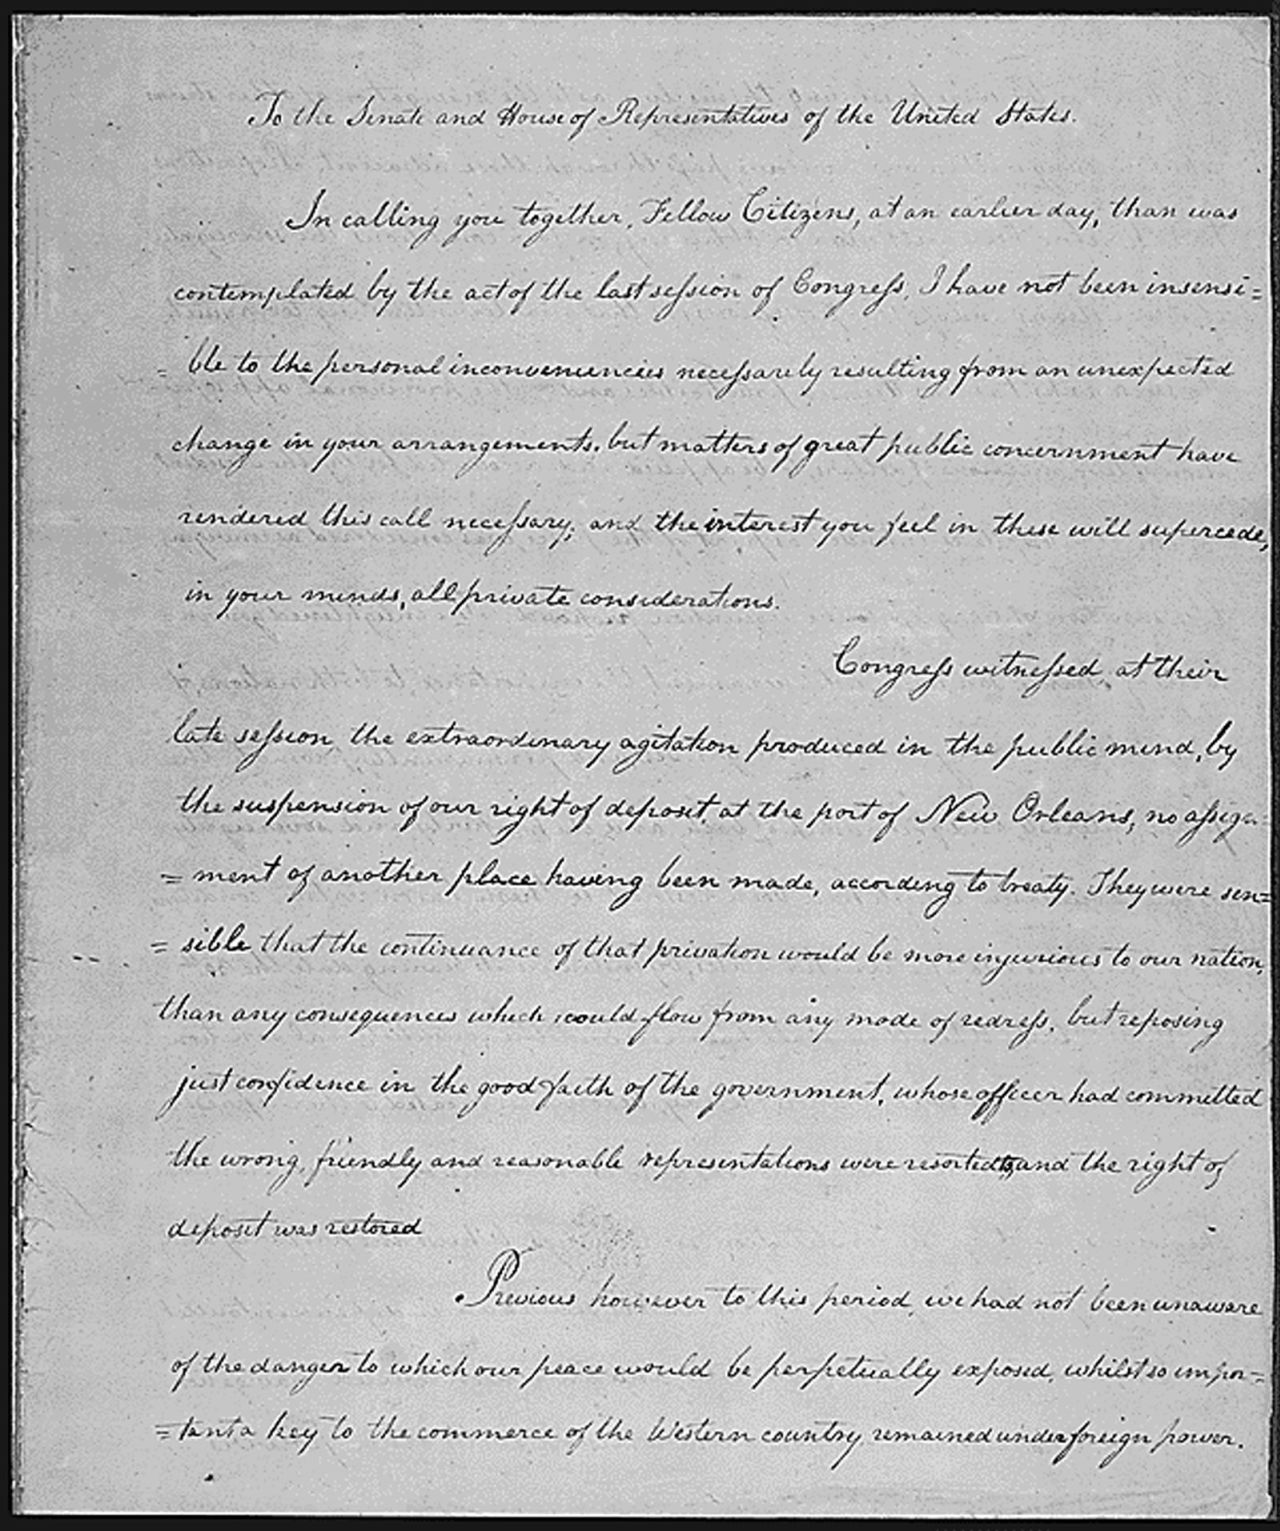 This photo shows the third annual message of President Thomas Jefferson from October 17, 1803.